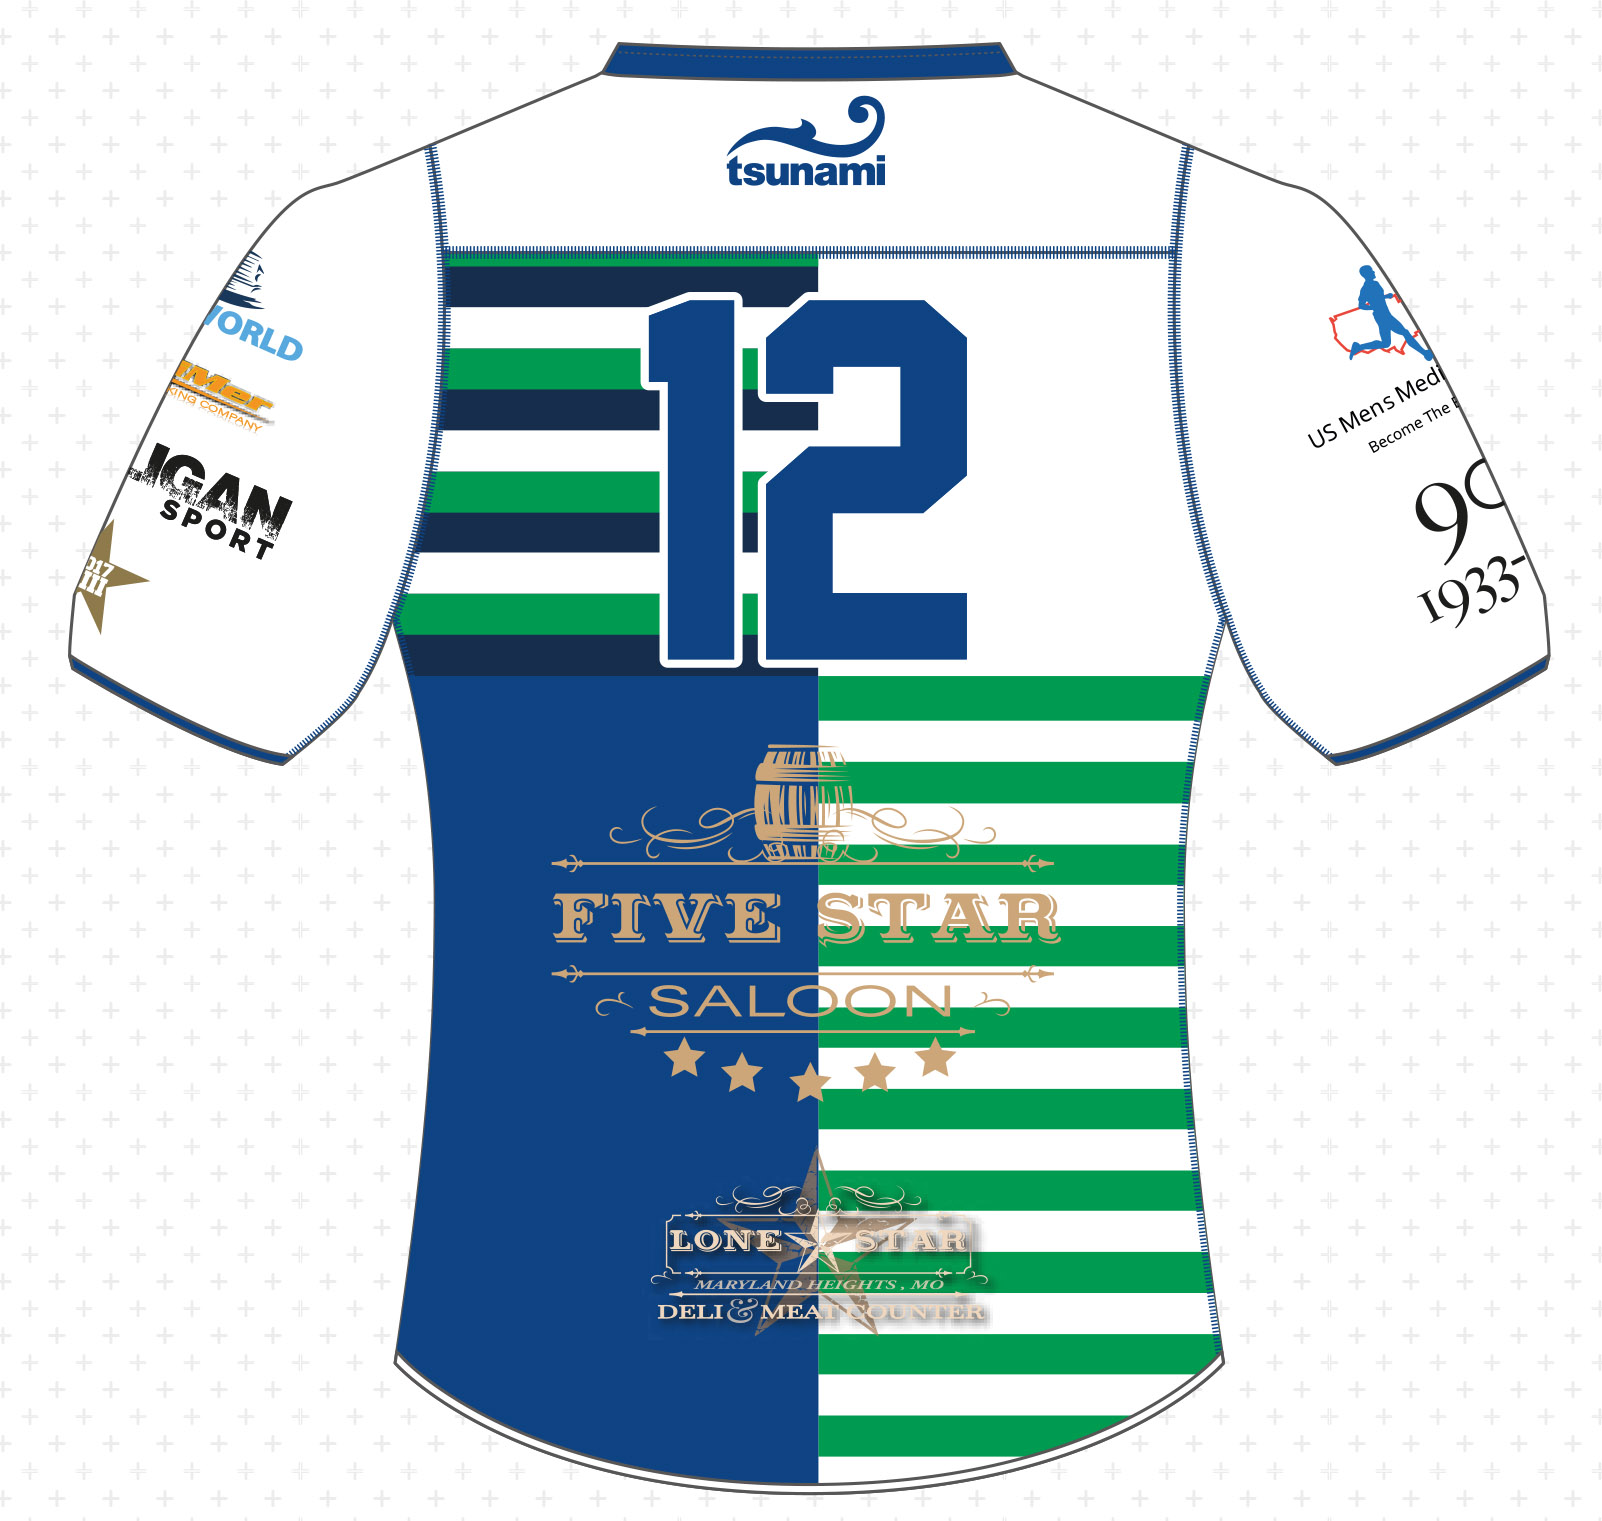 90th Anniversary Jersey for Royal Rambler Rugby Club